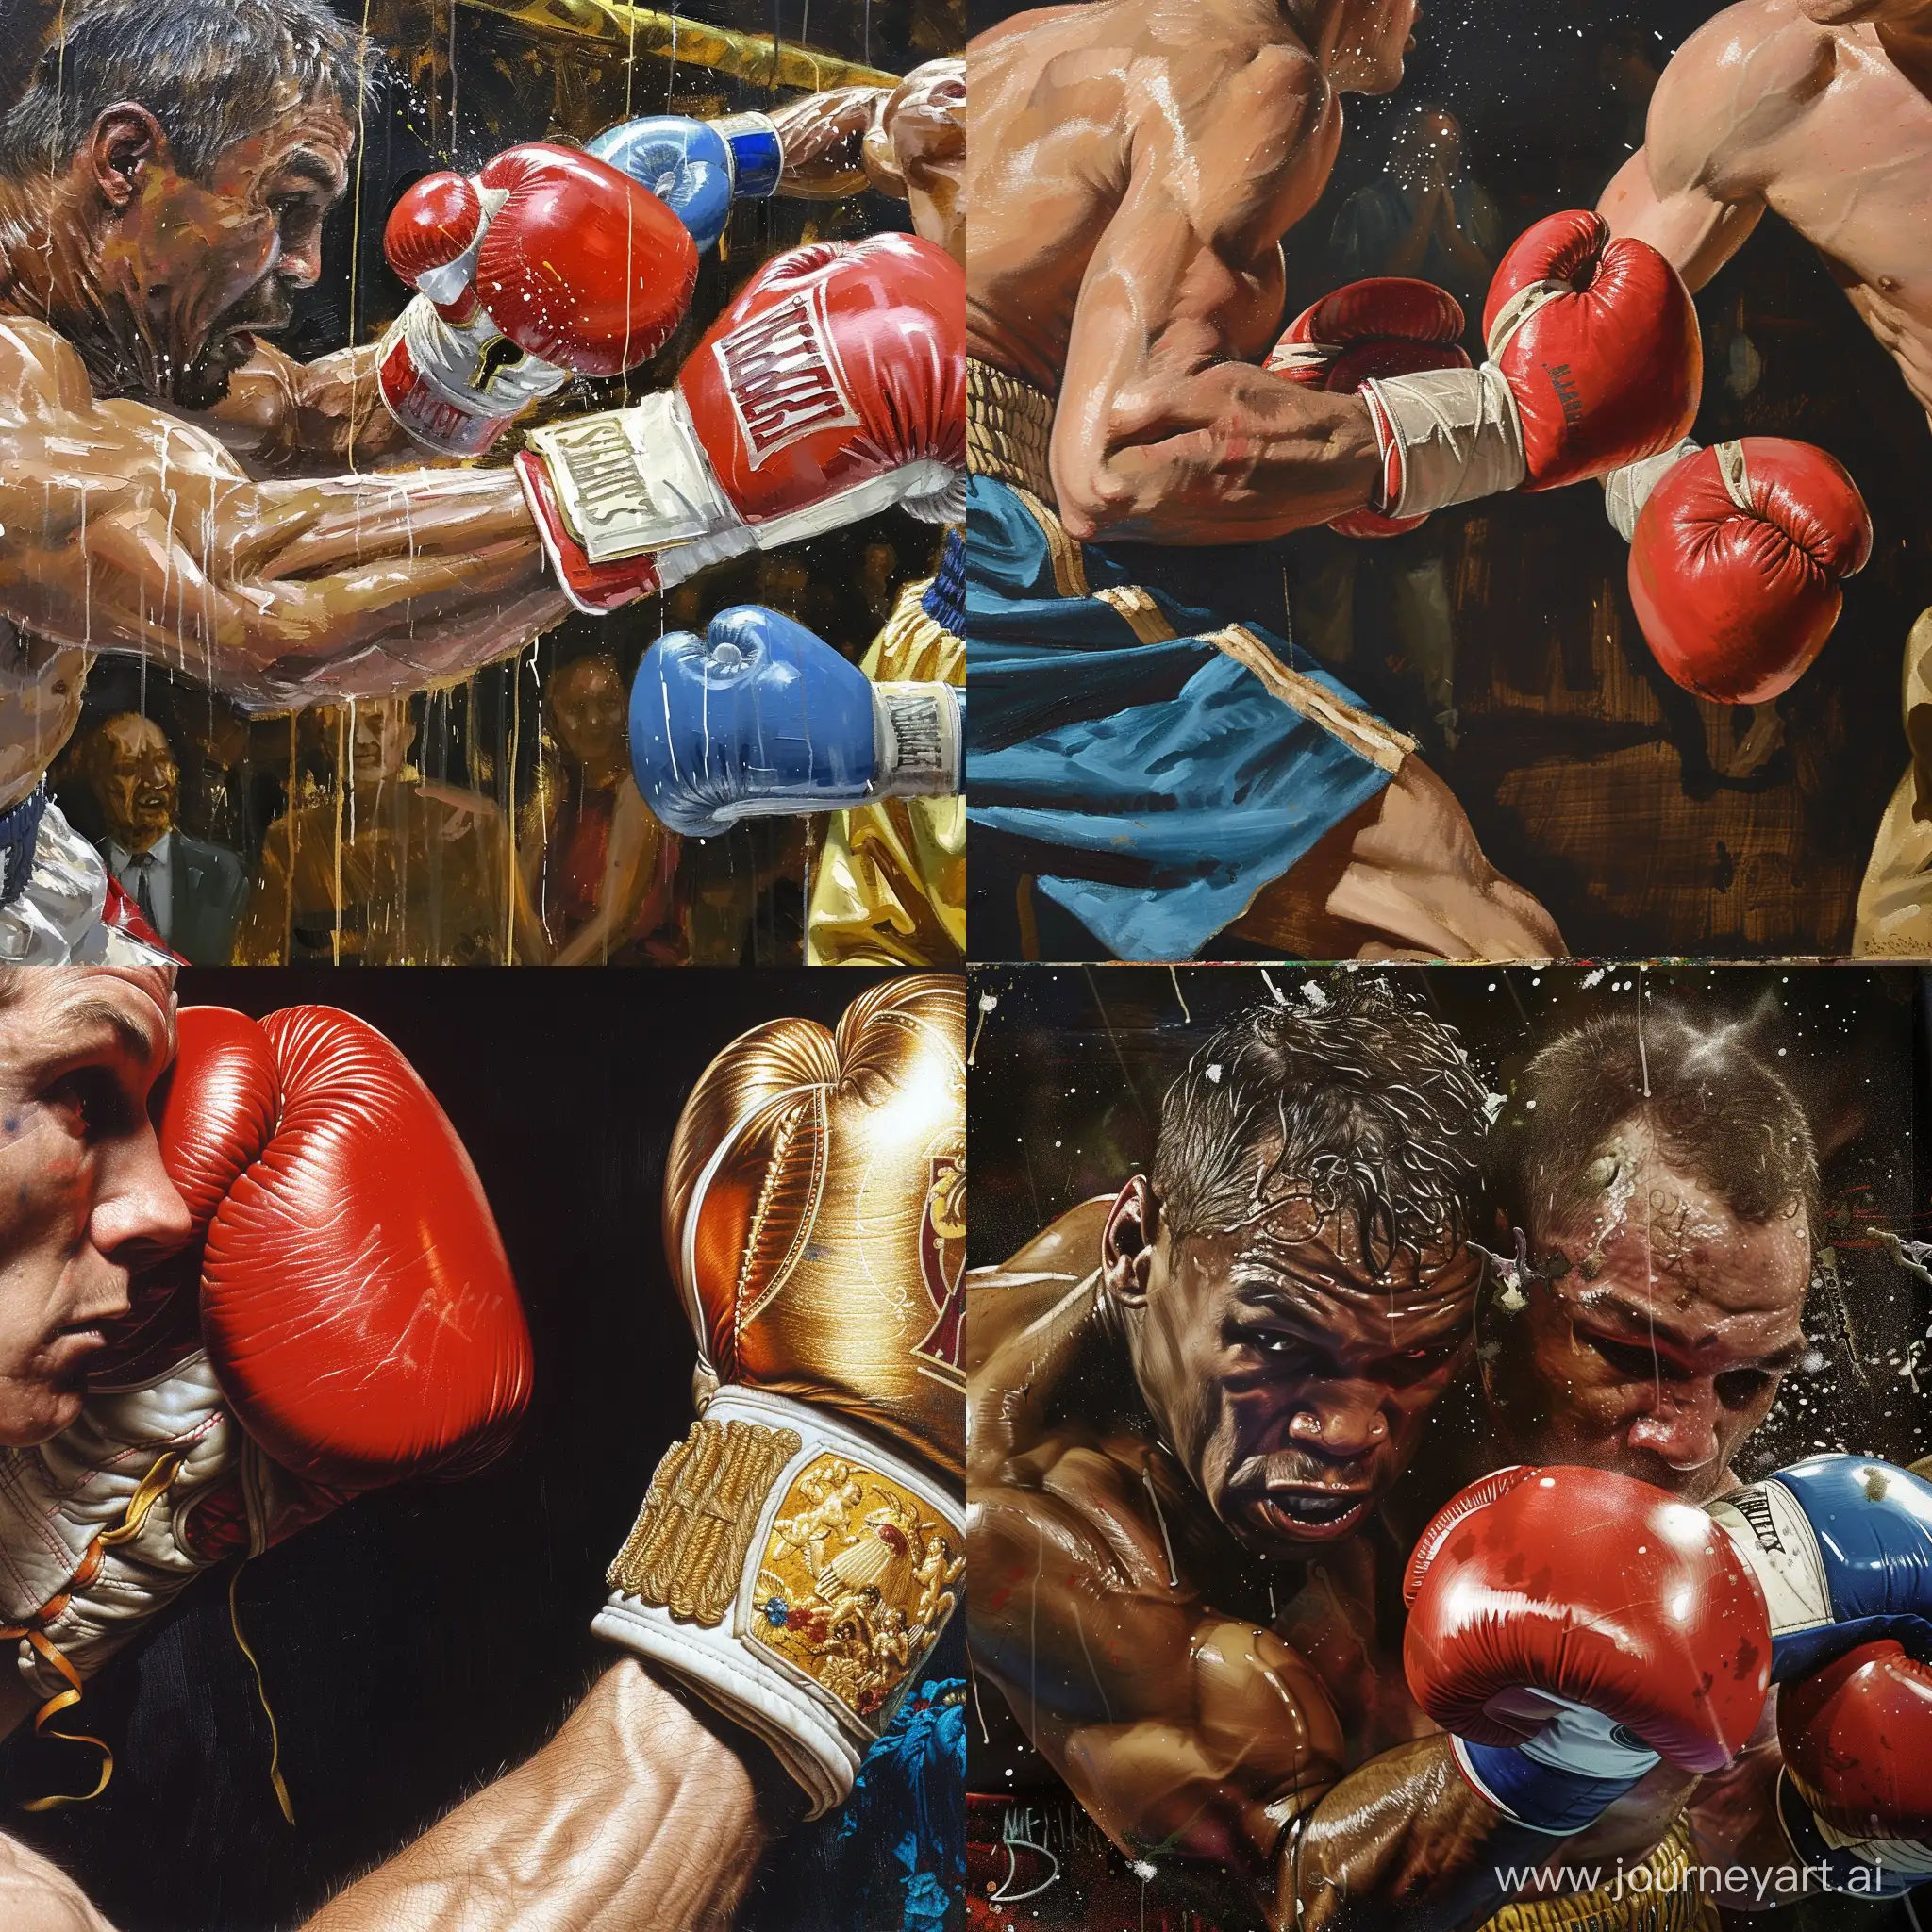 Boxing match, closeup, baroque artstyle painting